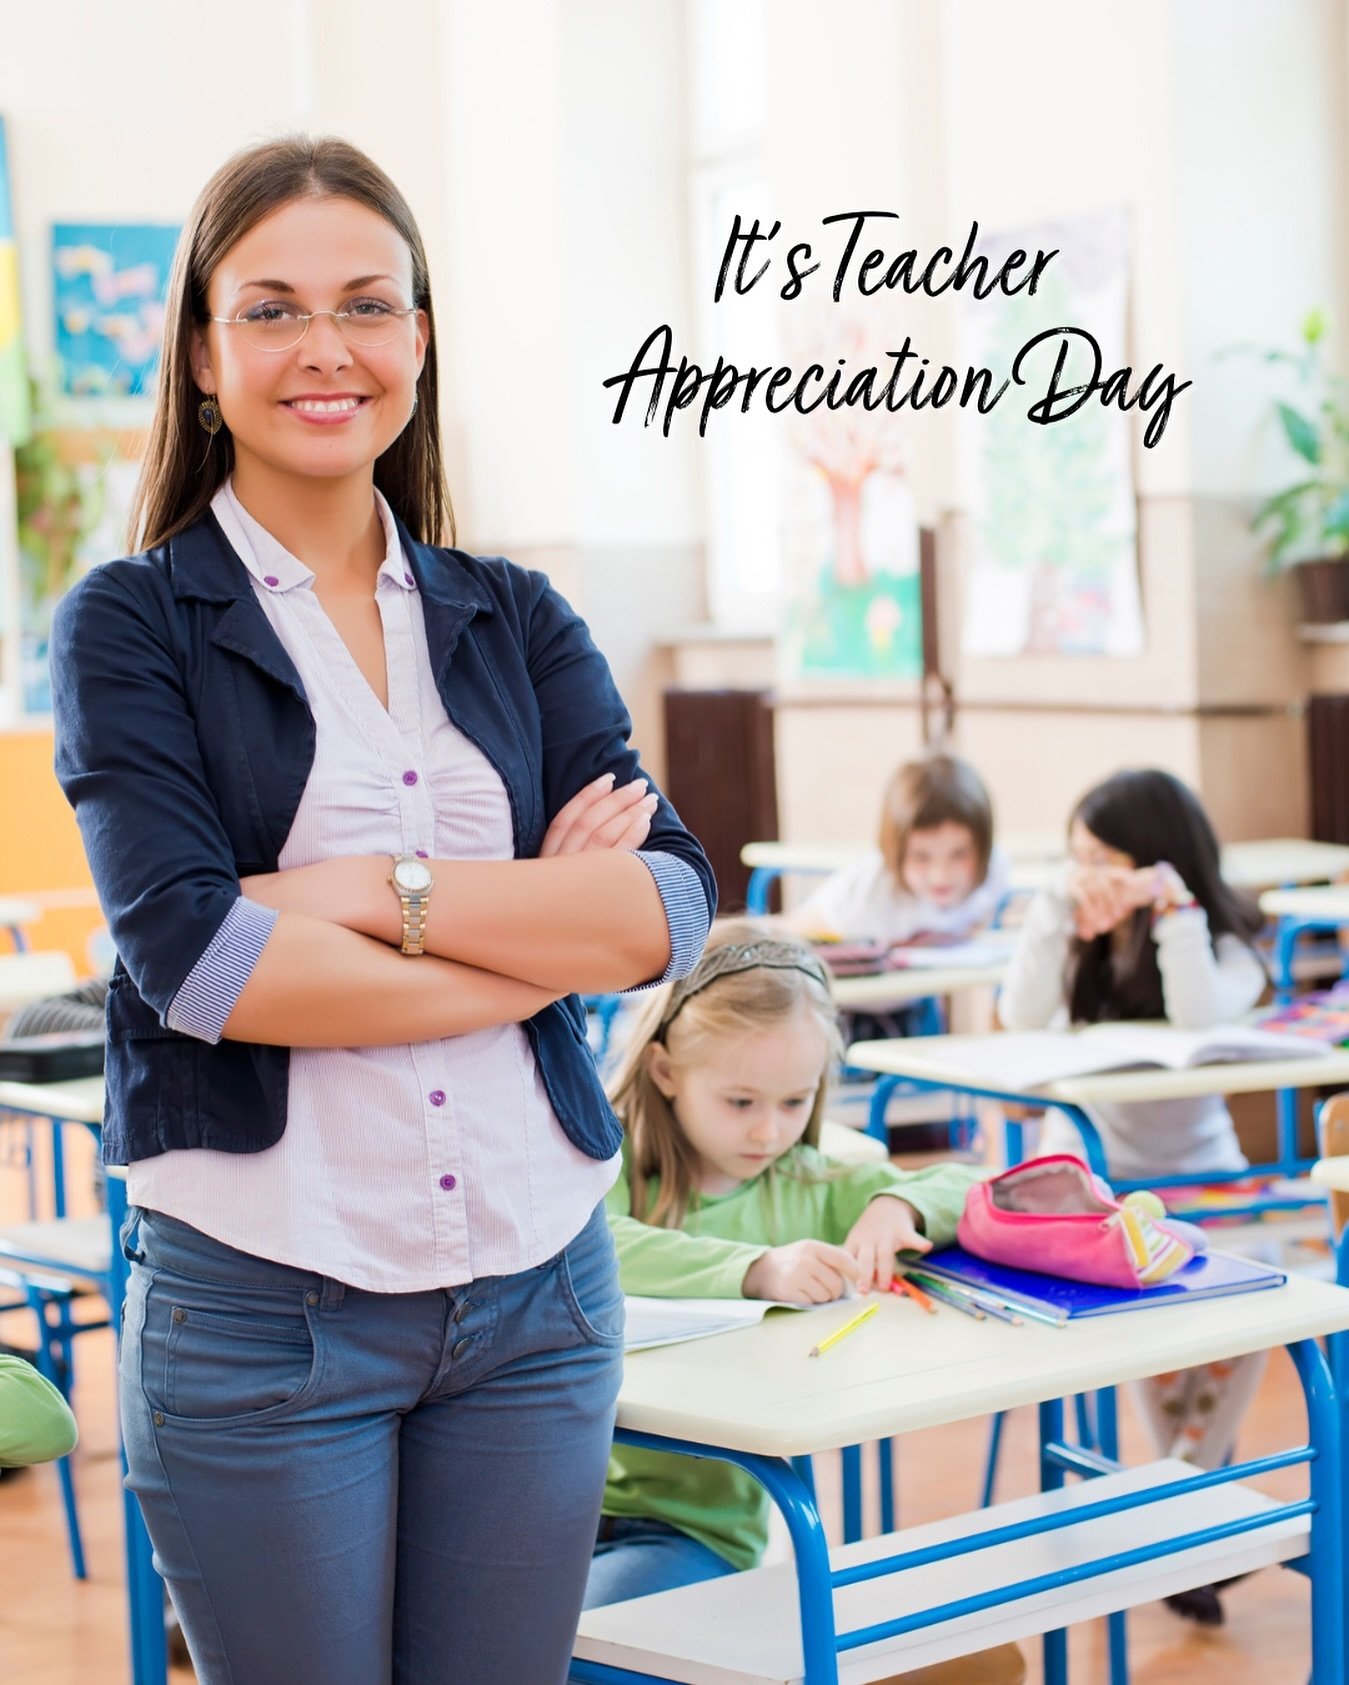 🌟 Teacher Appreciation Day is here! 🍎✨ Today, let&rsquo;s take some time to show our gratitude to the amazing teachers who inspire and guide our children every day. 💖

A great way to express your appreciation is by treating your  kids&rsquo; teach